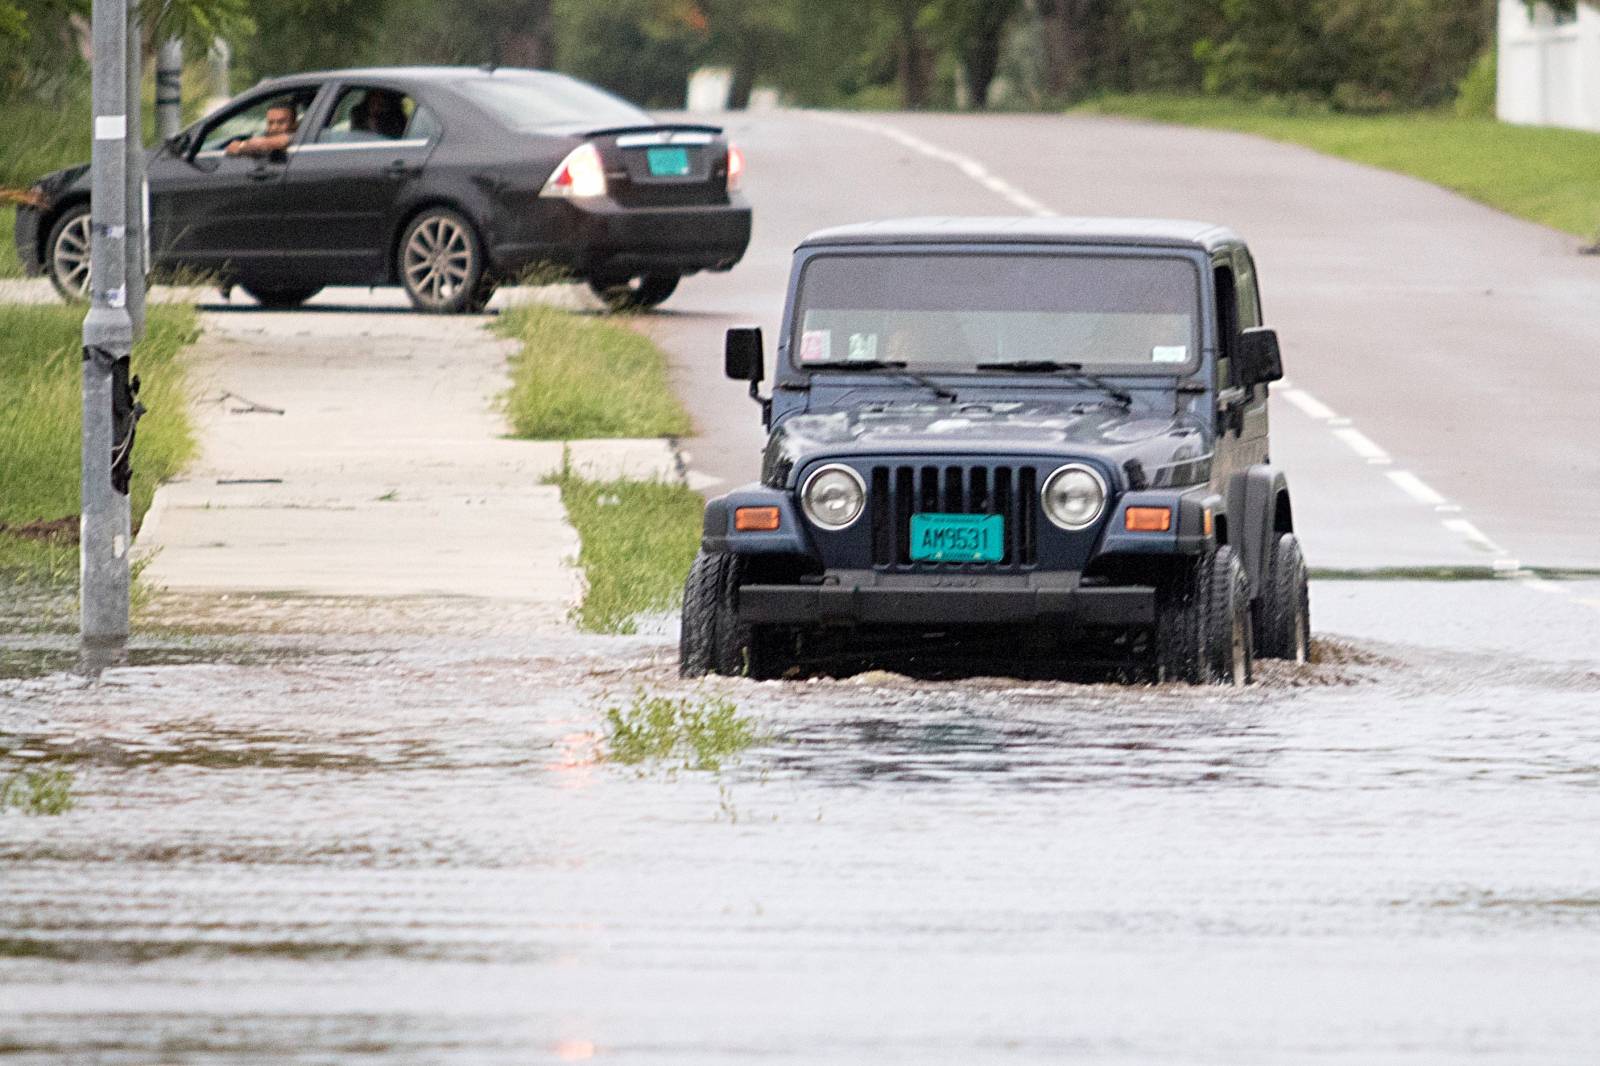 A Jeep drives through a flooded street after the effects of Hurricane Dorian arrived in Nassau